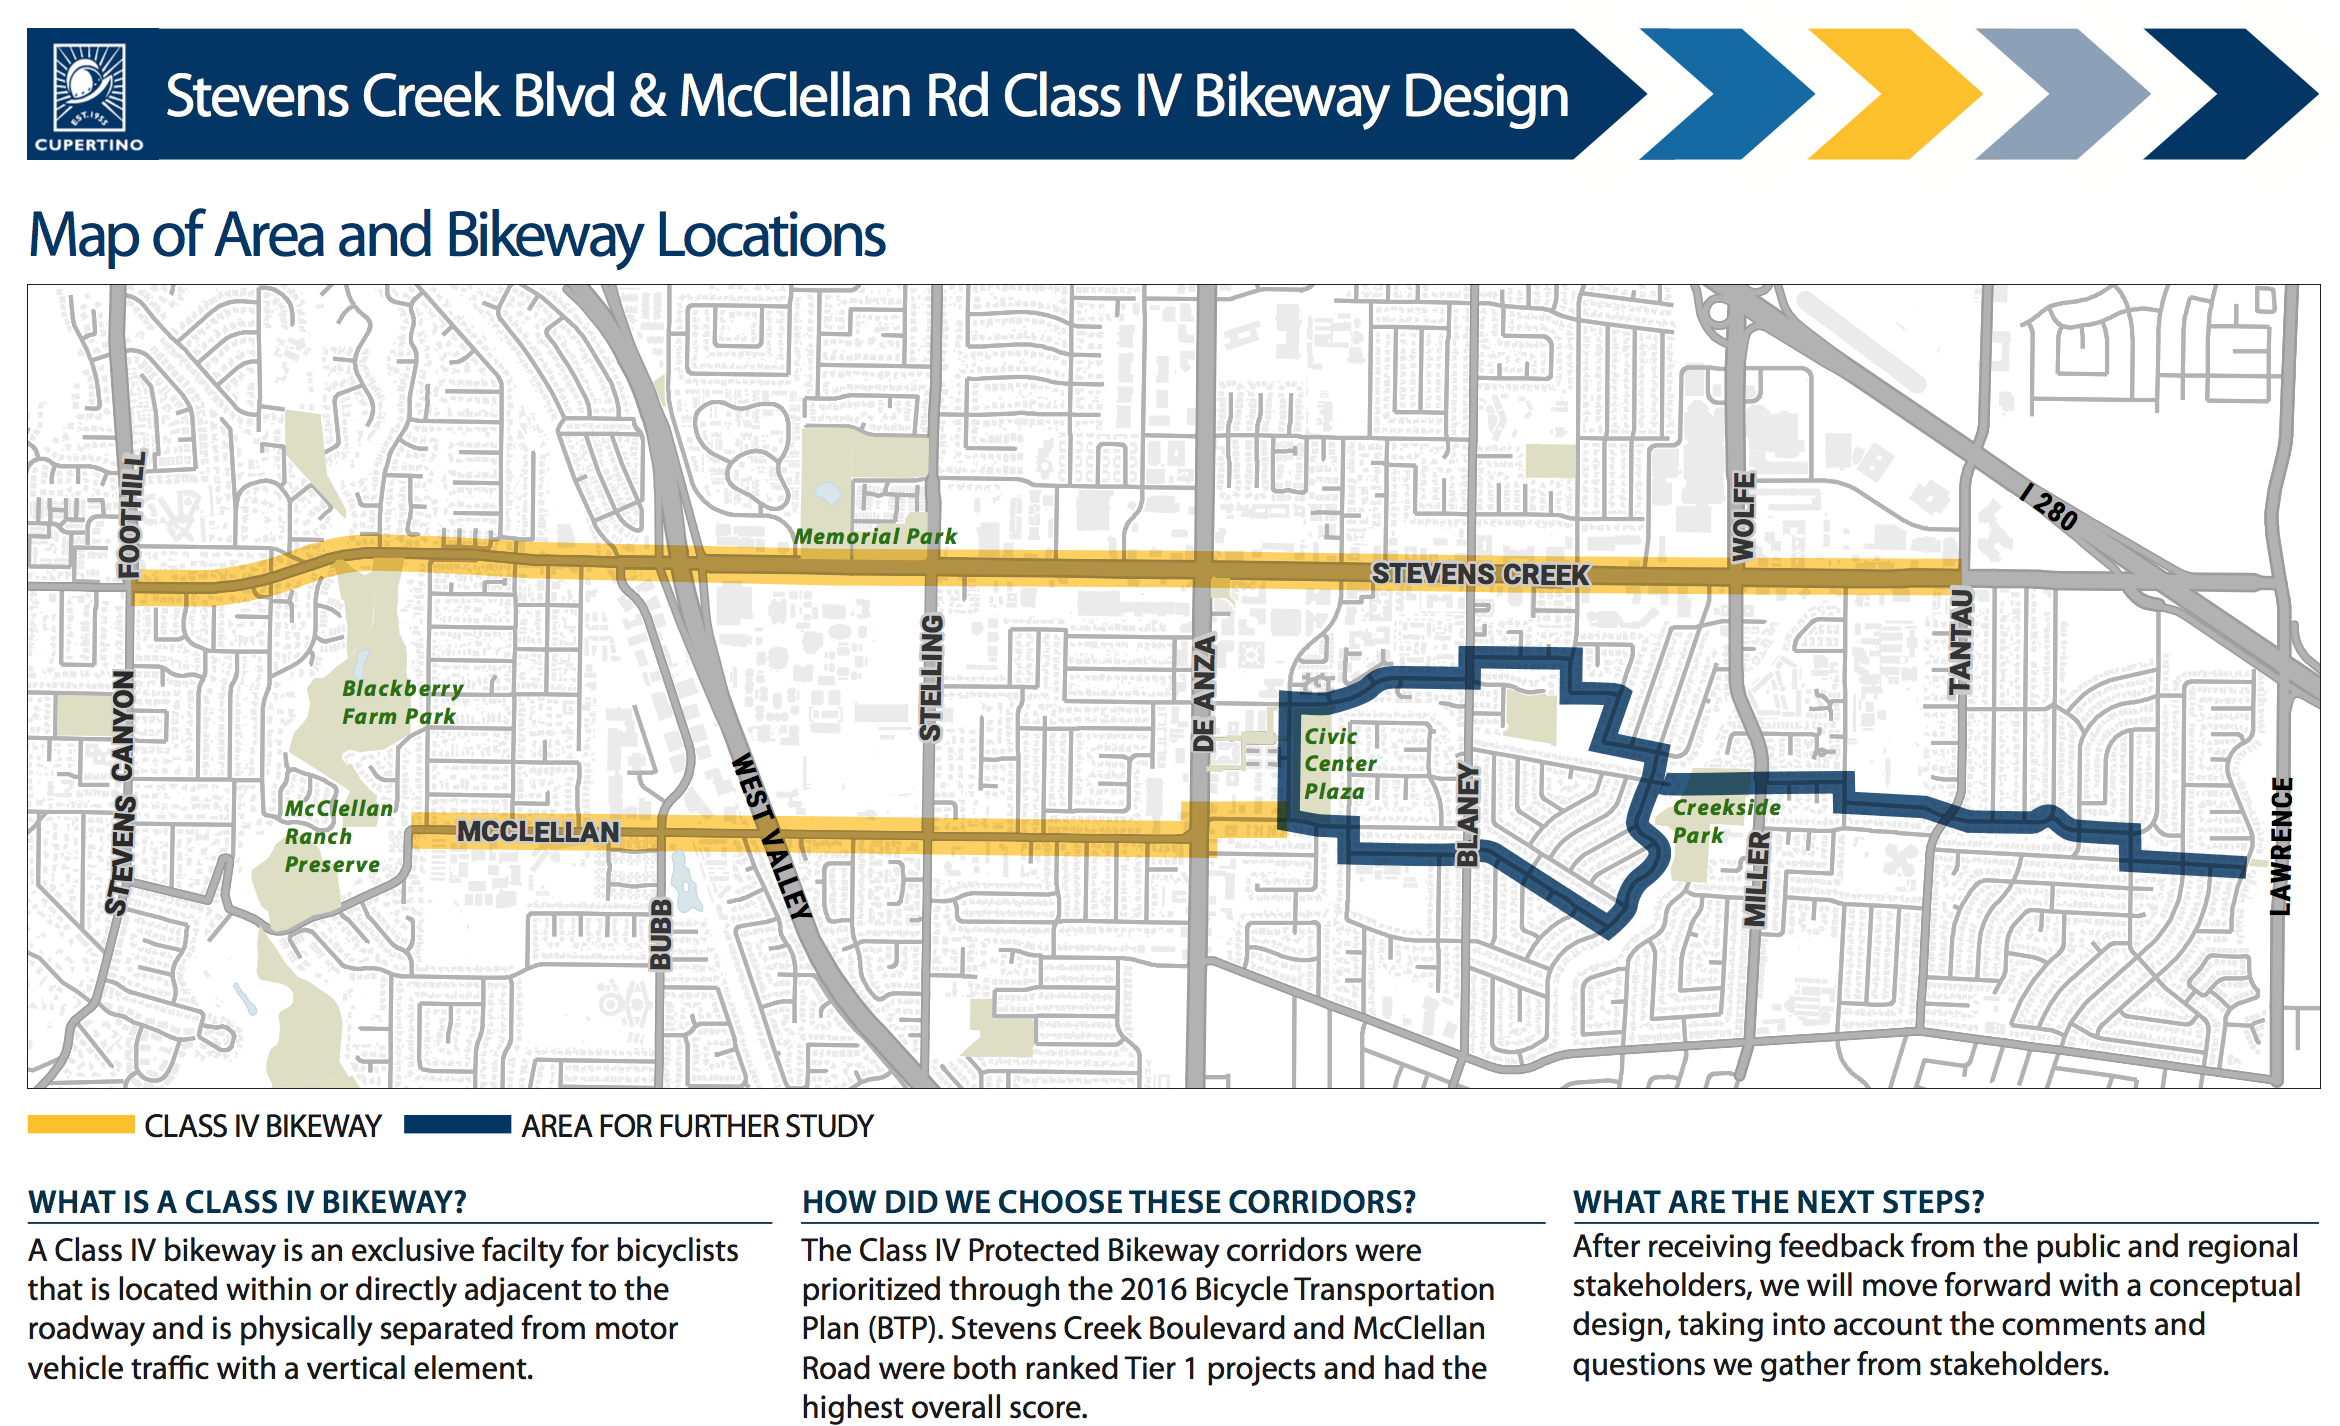 The City is moving ahead with the Bike Plan adopted in mid-2016